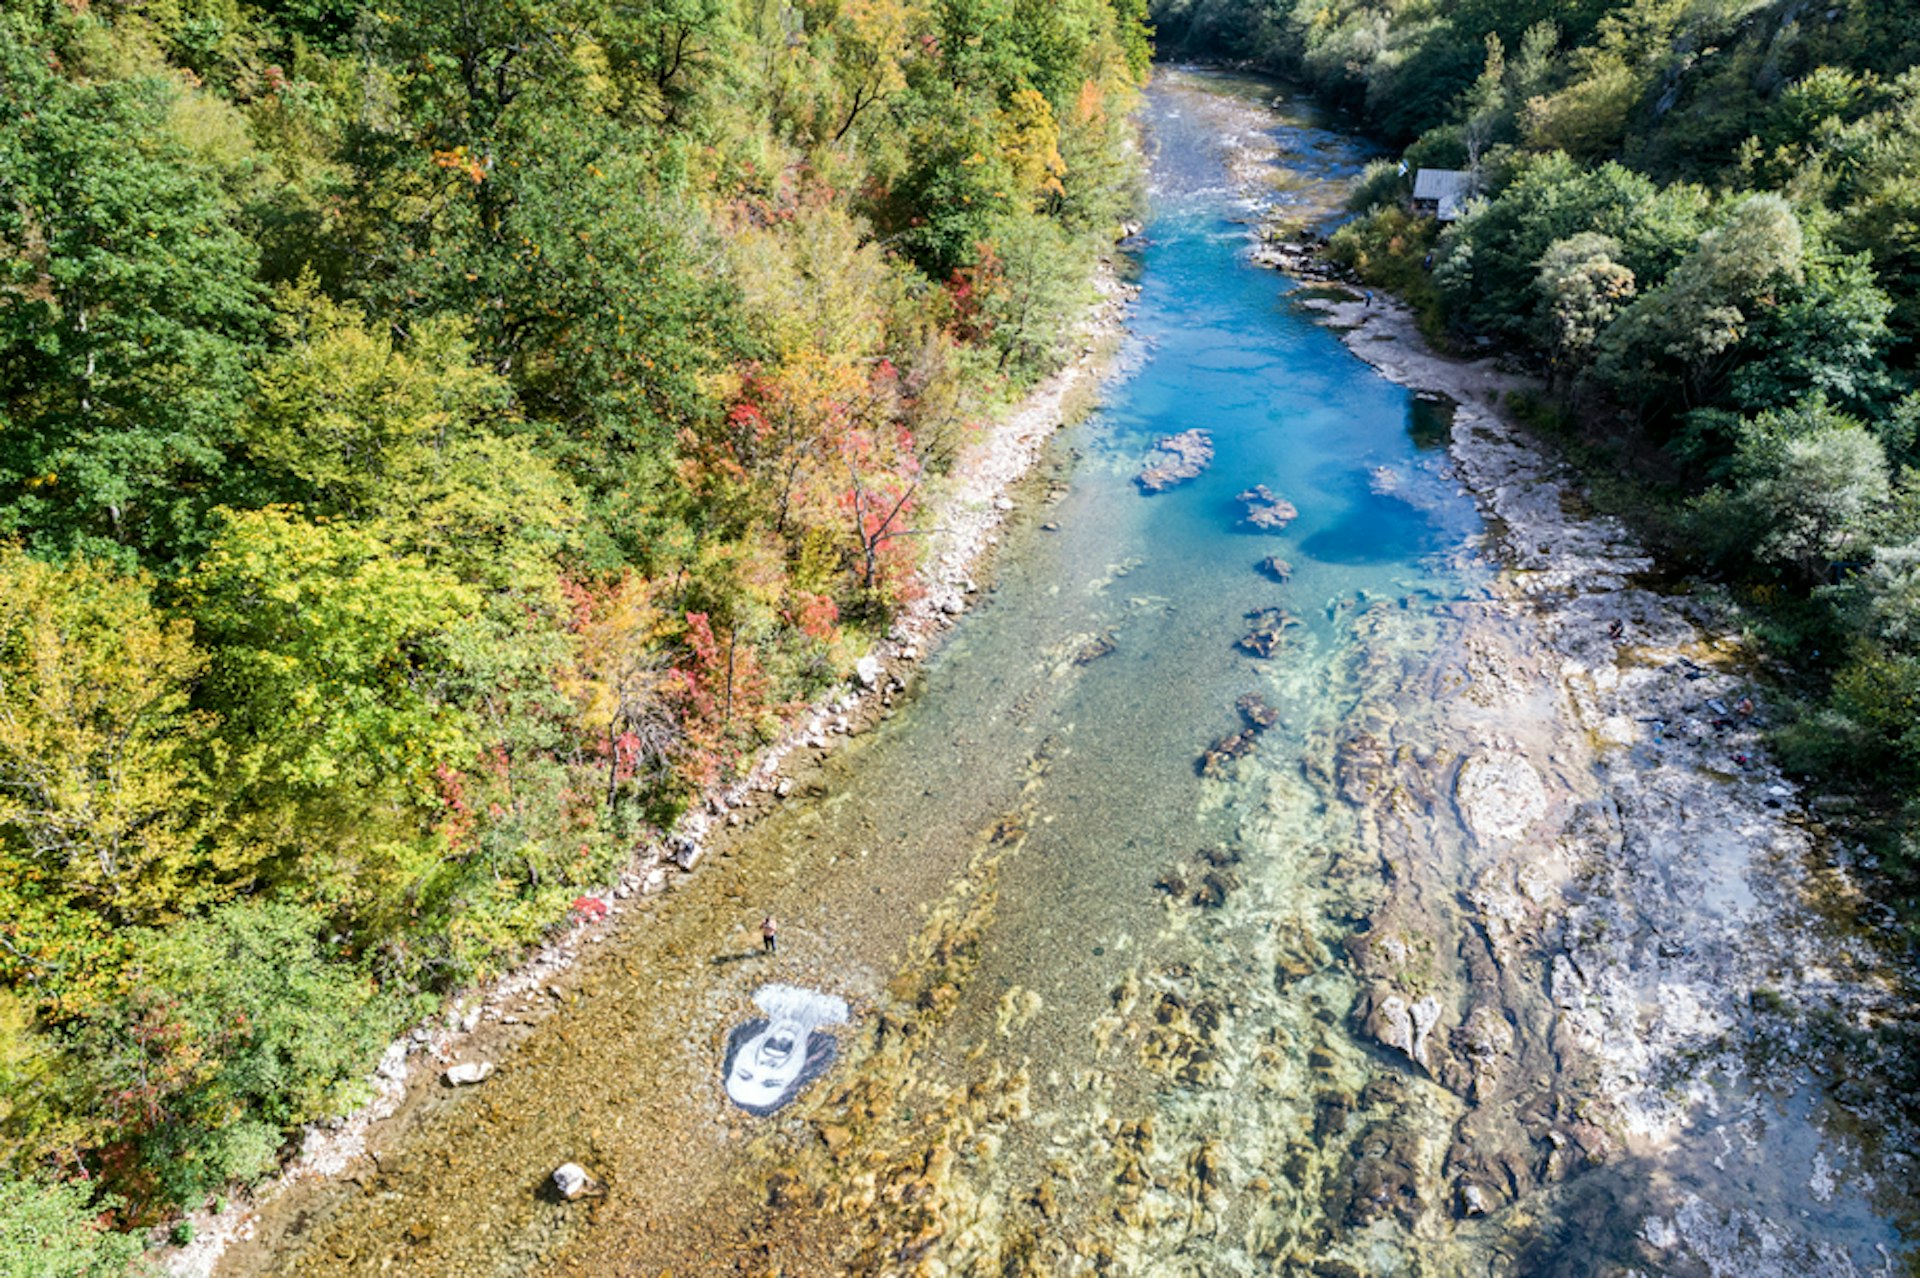 The fight to save Europe’s last wild rivers